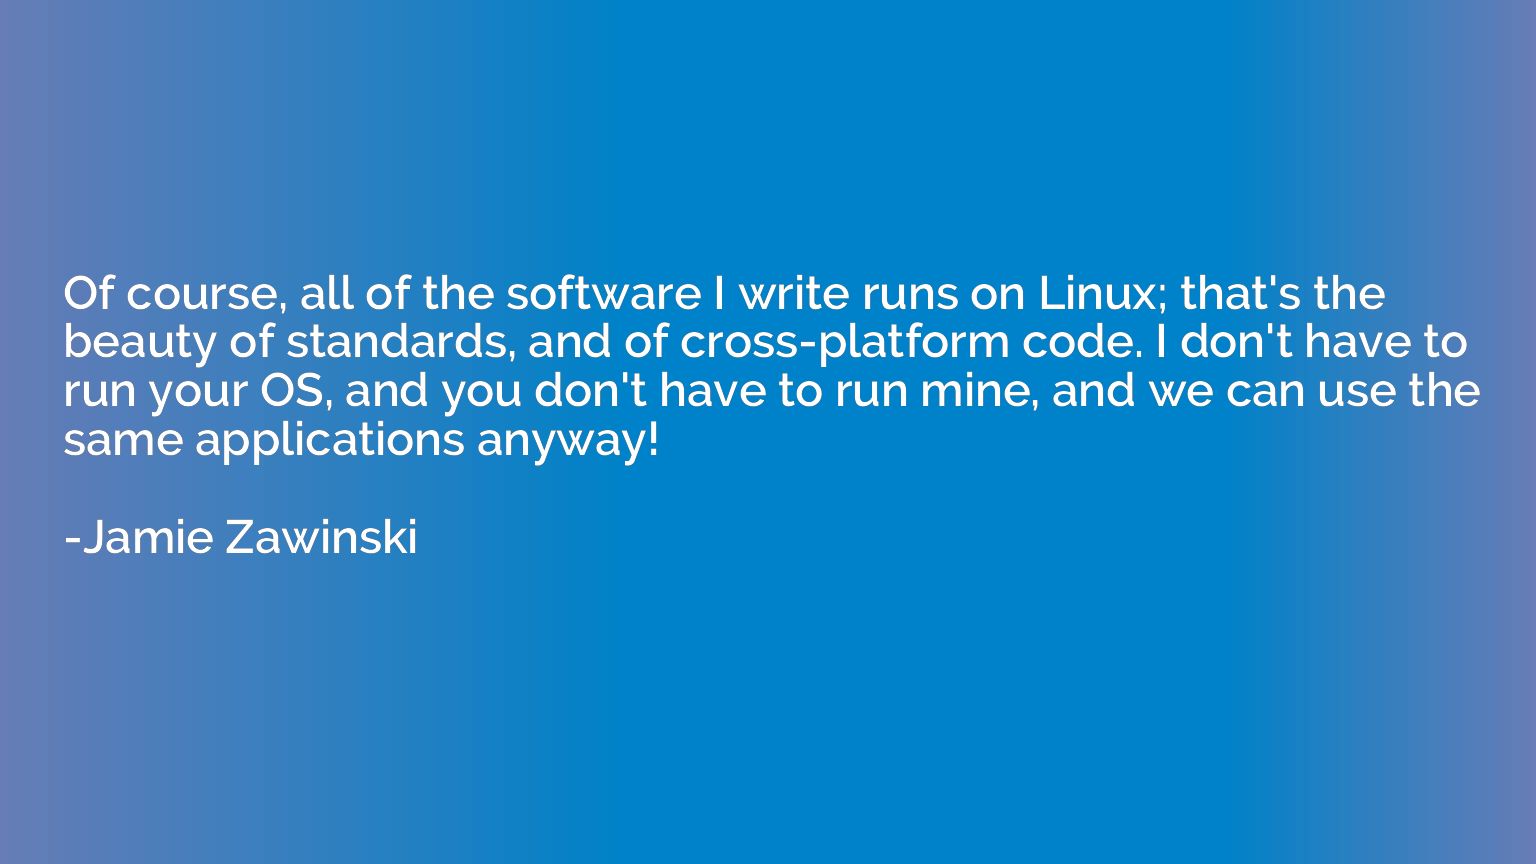 Of course, all of the software I write runs on Linux; that's